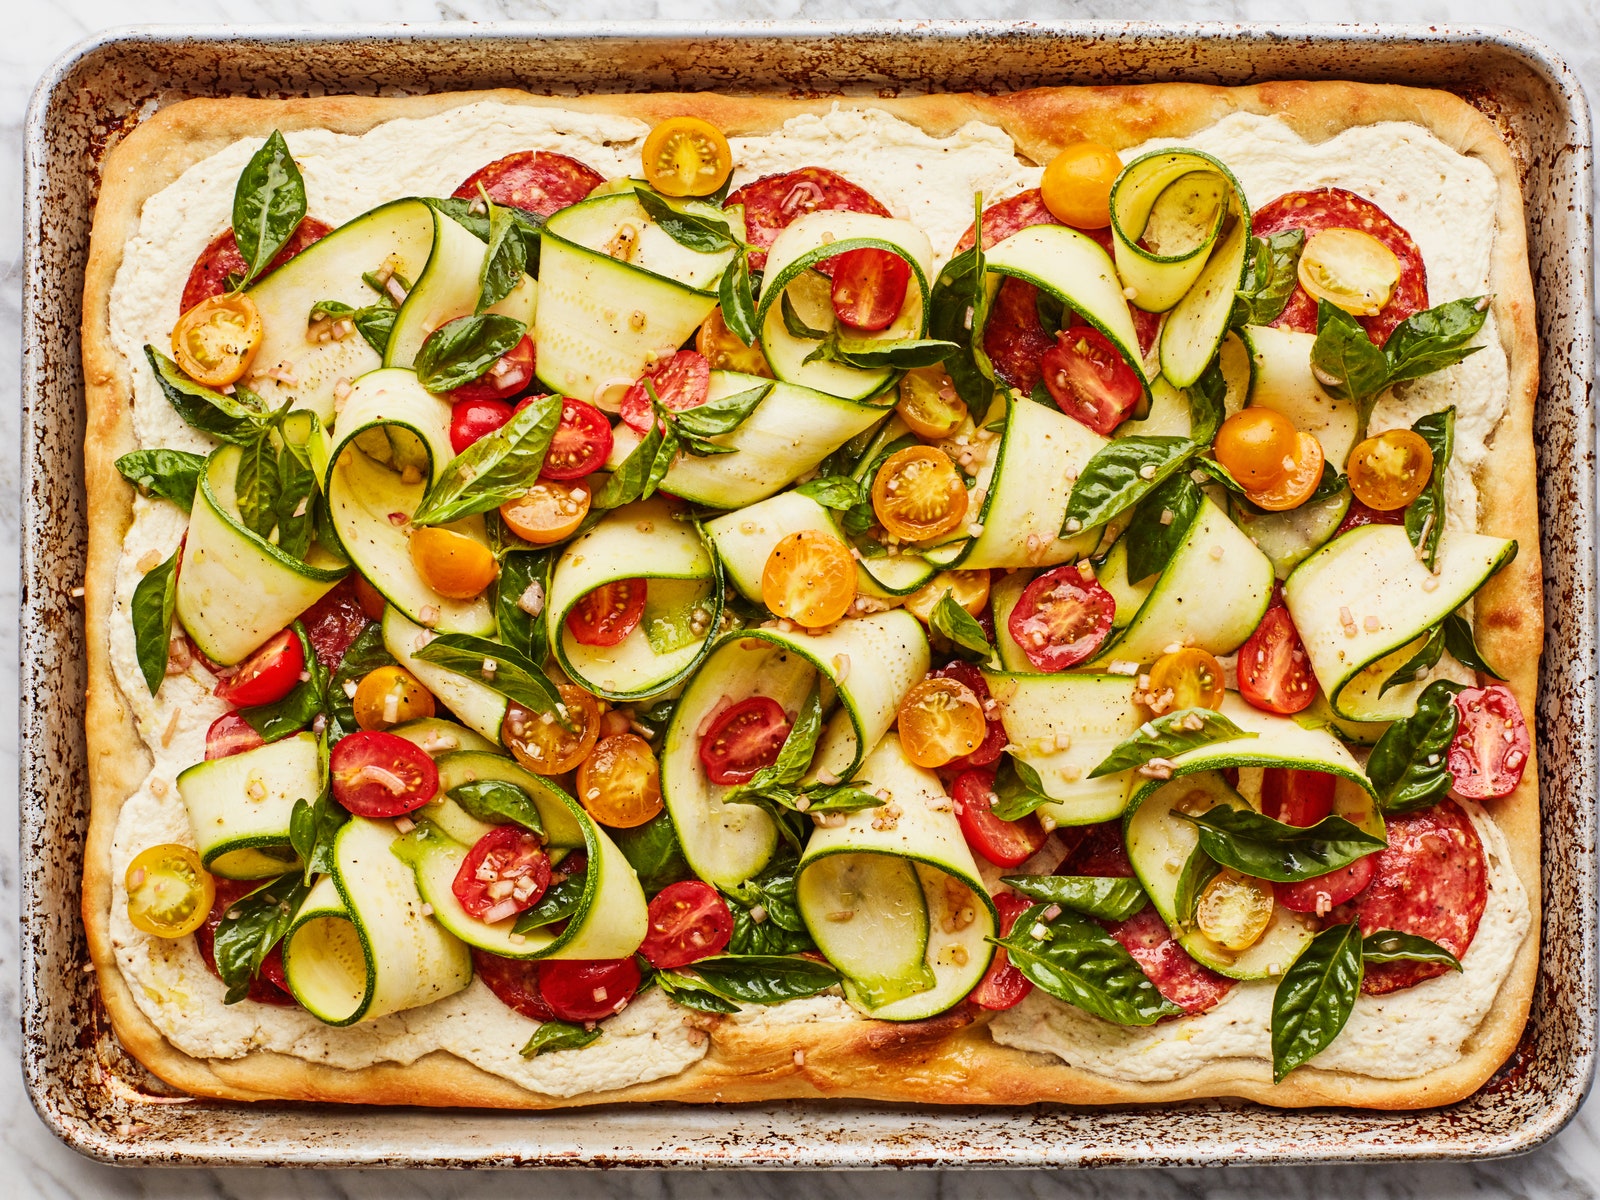 51 Zucchini Recipes for Using up All That Summer Squash